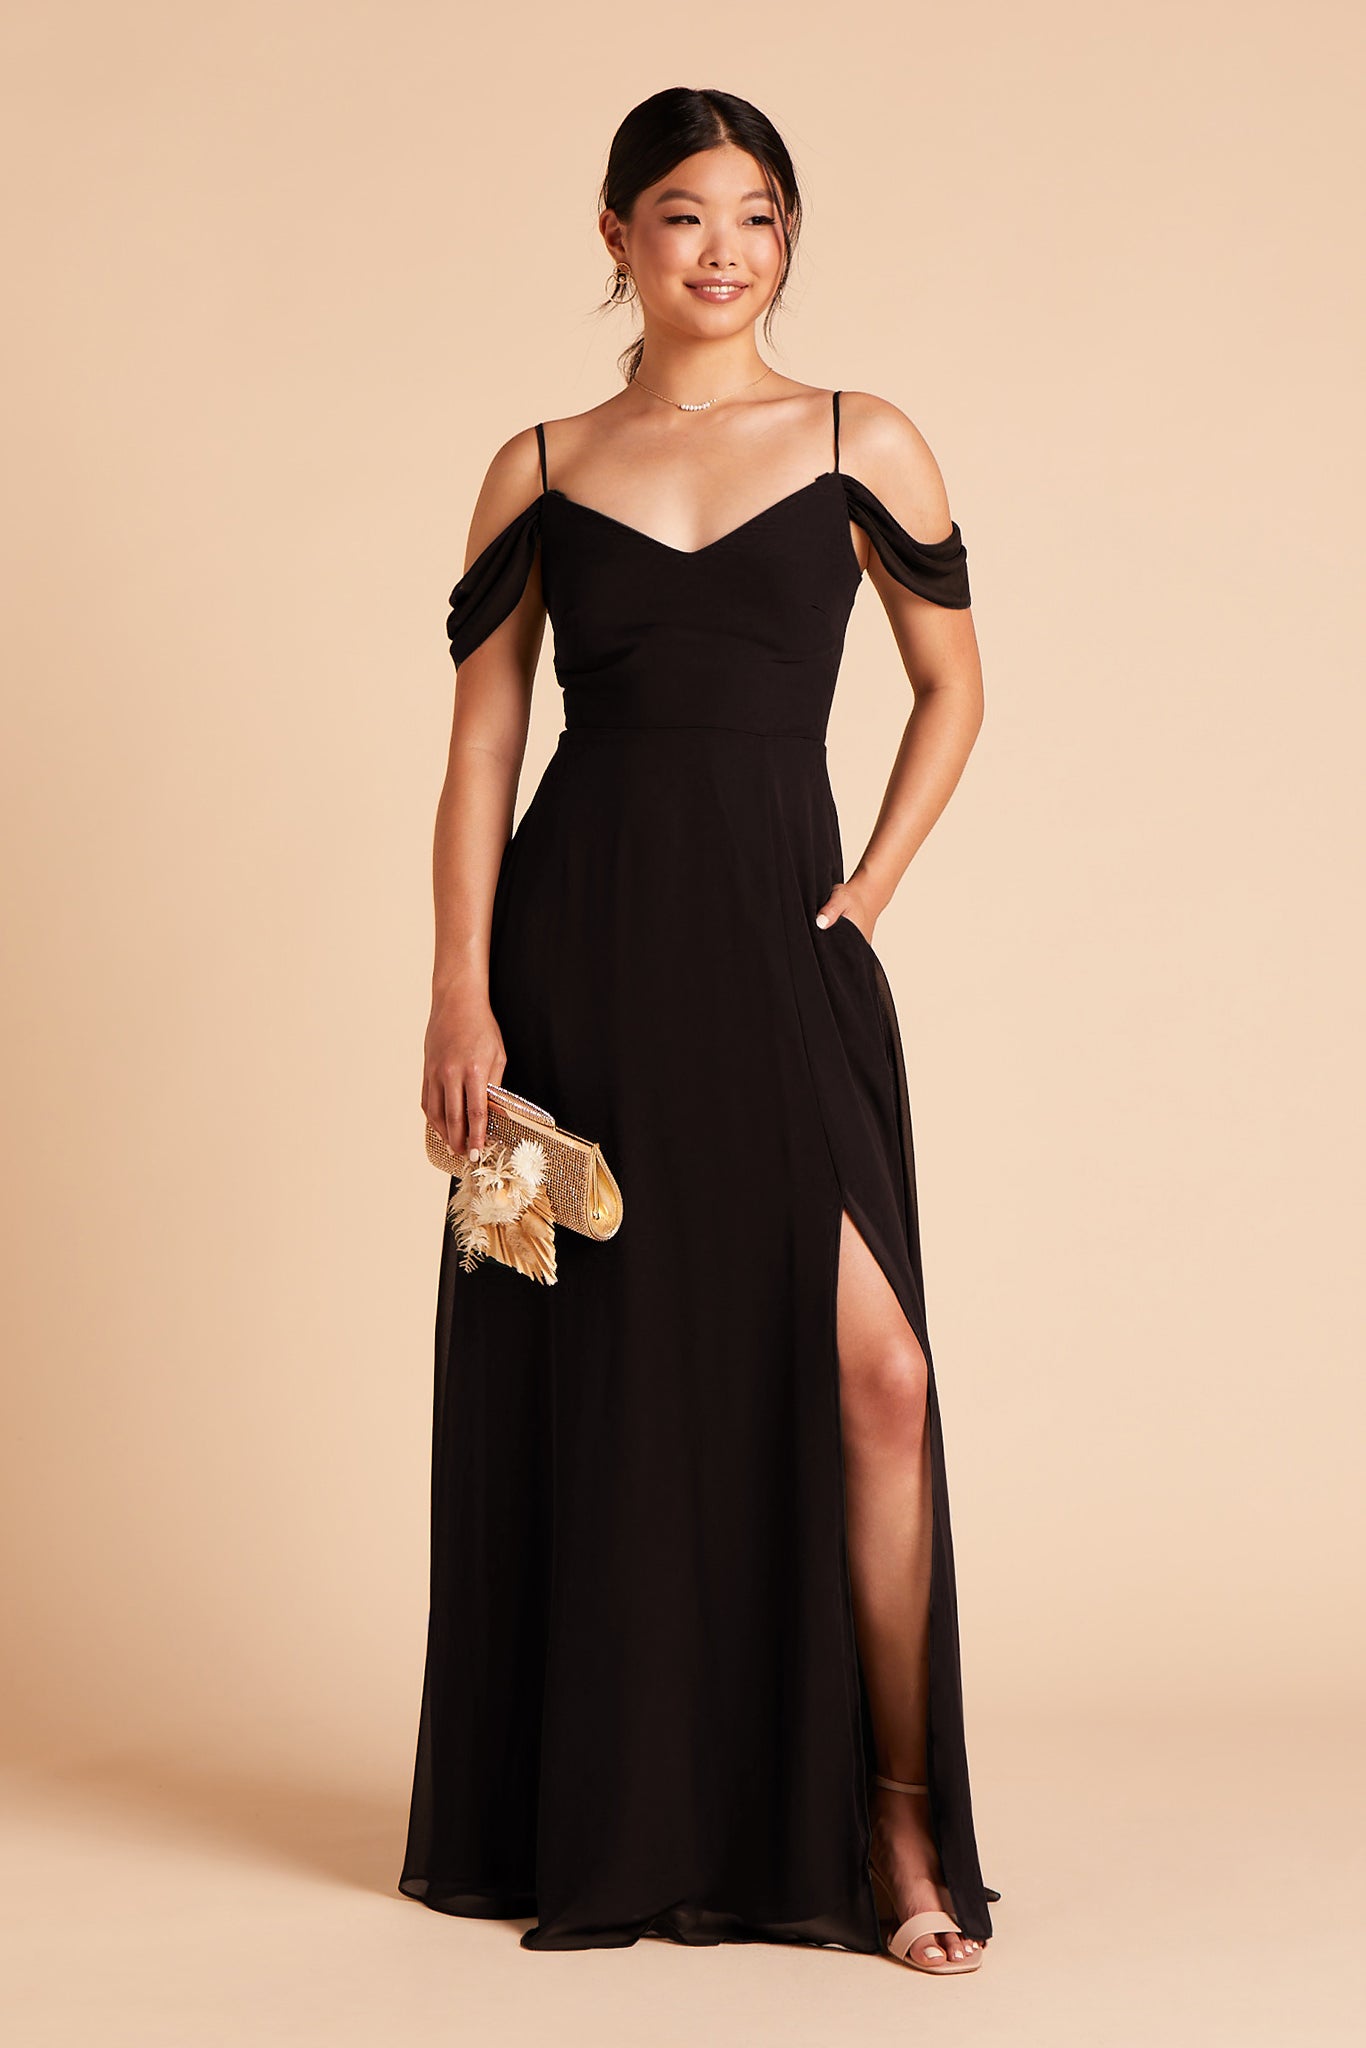 Long floor-sweeping black chiffon bridesmaid dress with slit and a V-neckline and sleeves